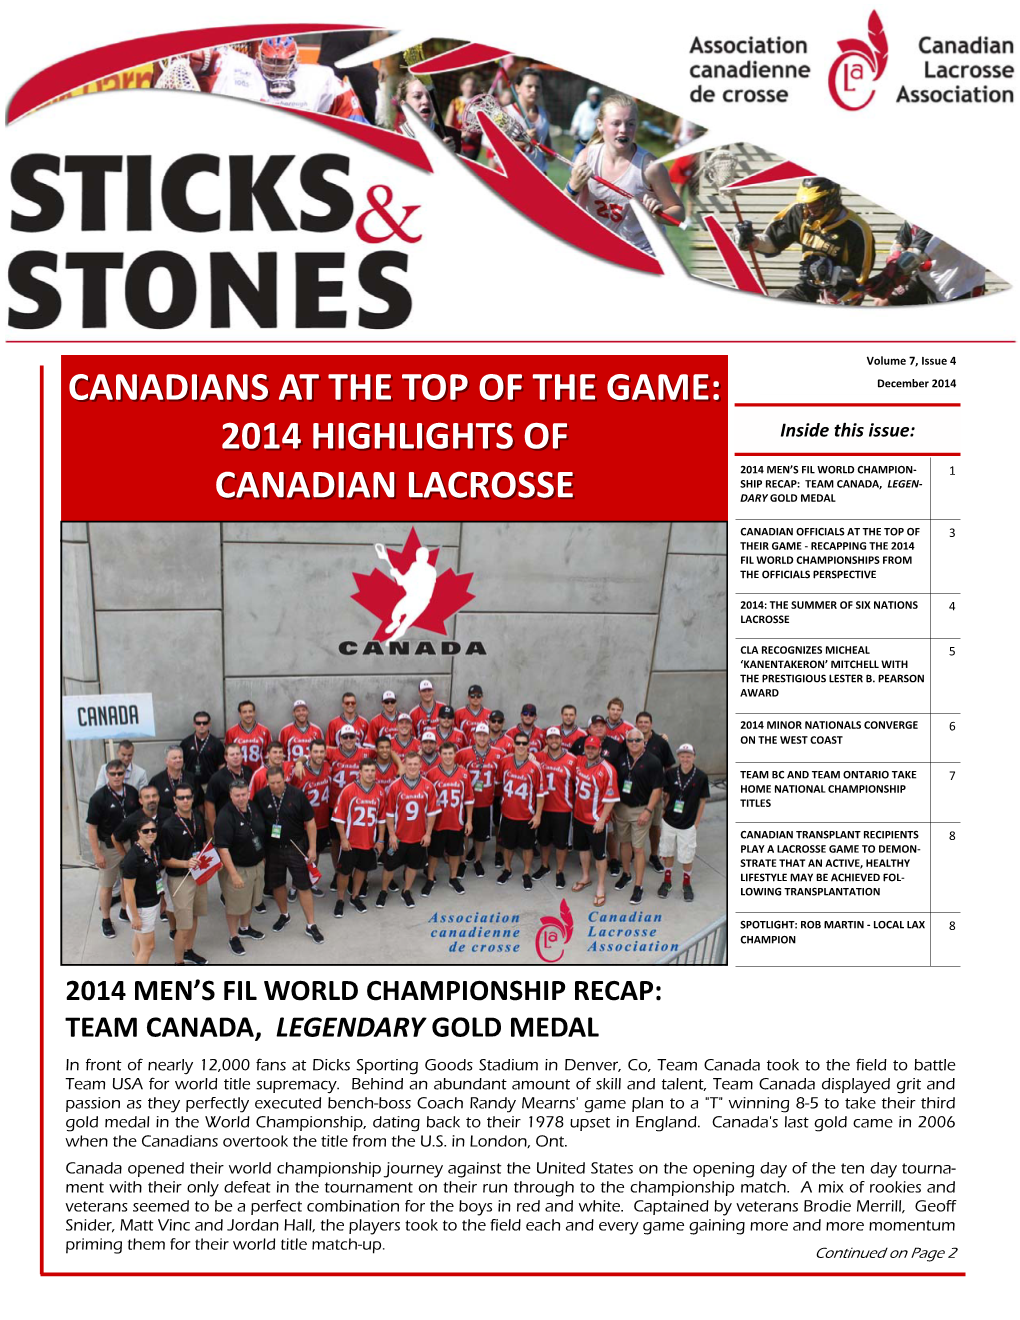 2014 Highlights of Canadian Lacrosse